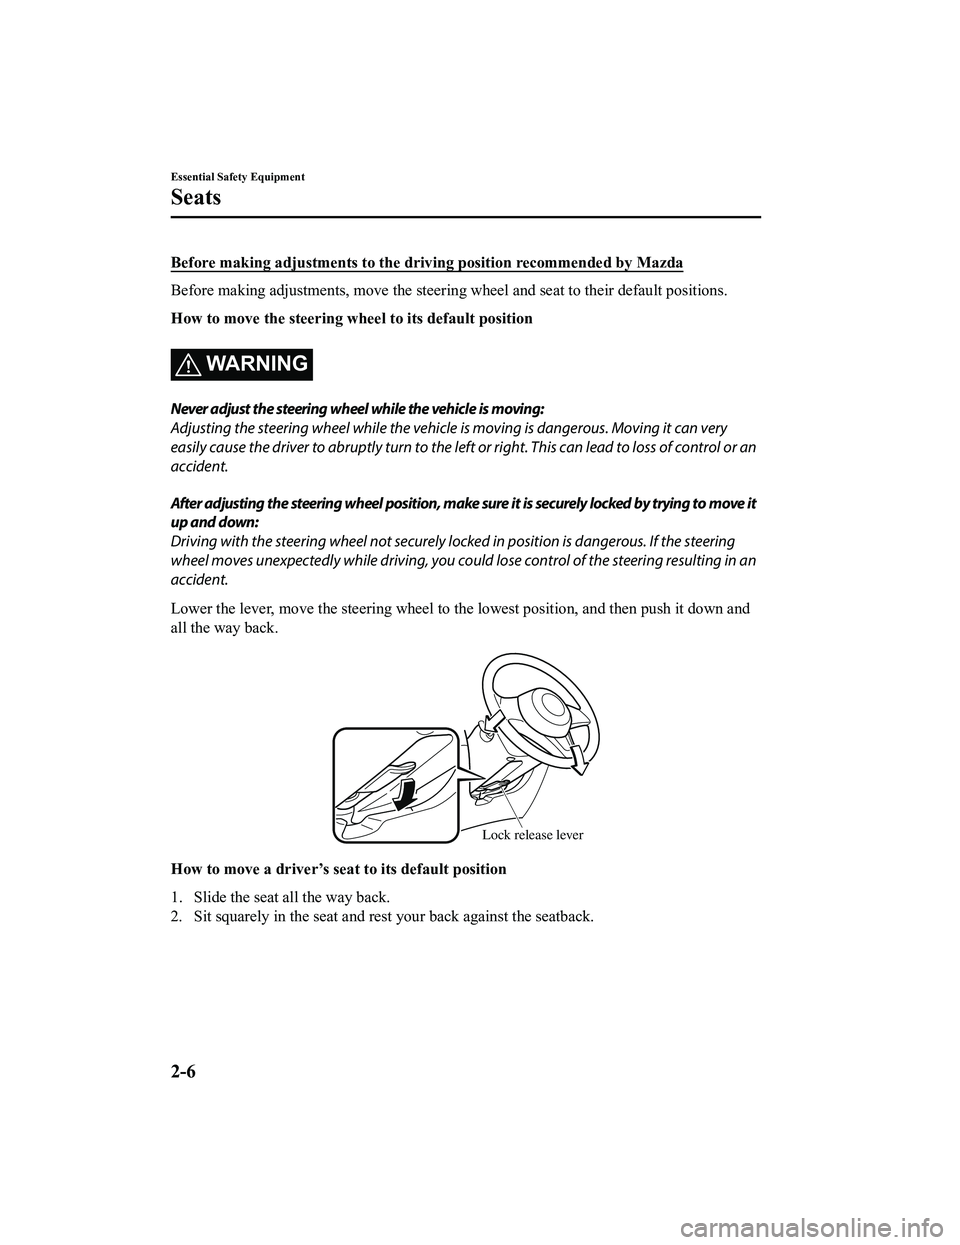 MAZDA MODEL MX-5 MIATA RF 2022 Owners Manual Before making adjustments to the driving position recommended by Mazda
Before making adjustments, move the steering wheel and seat to their default positions.
How to move the steering wheel to its def